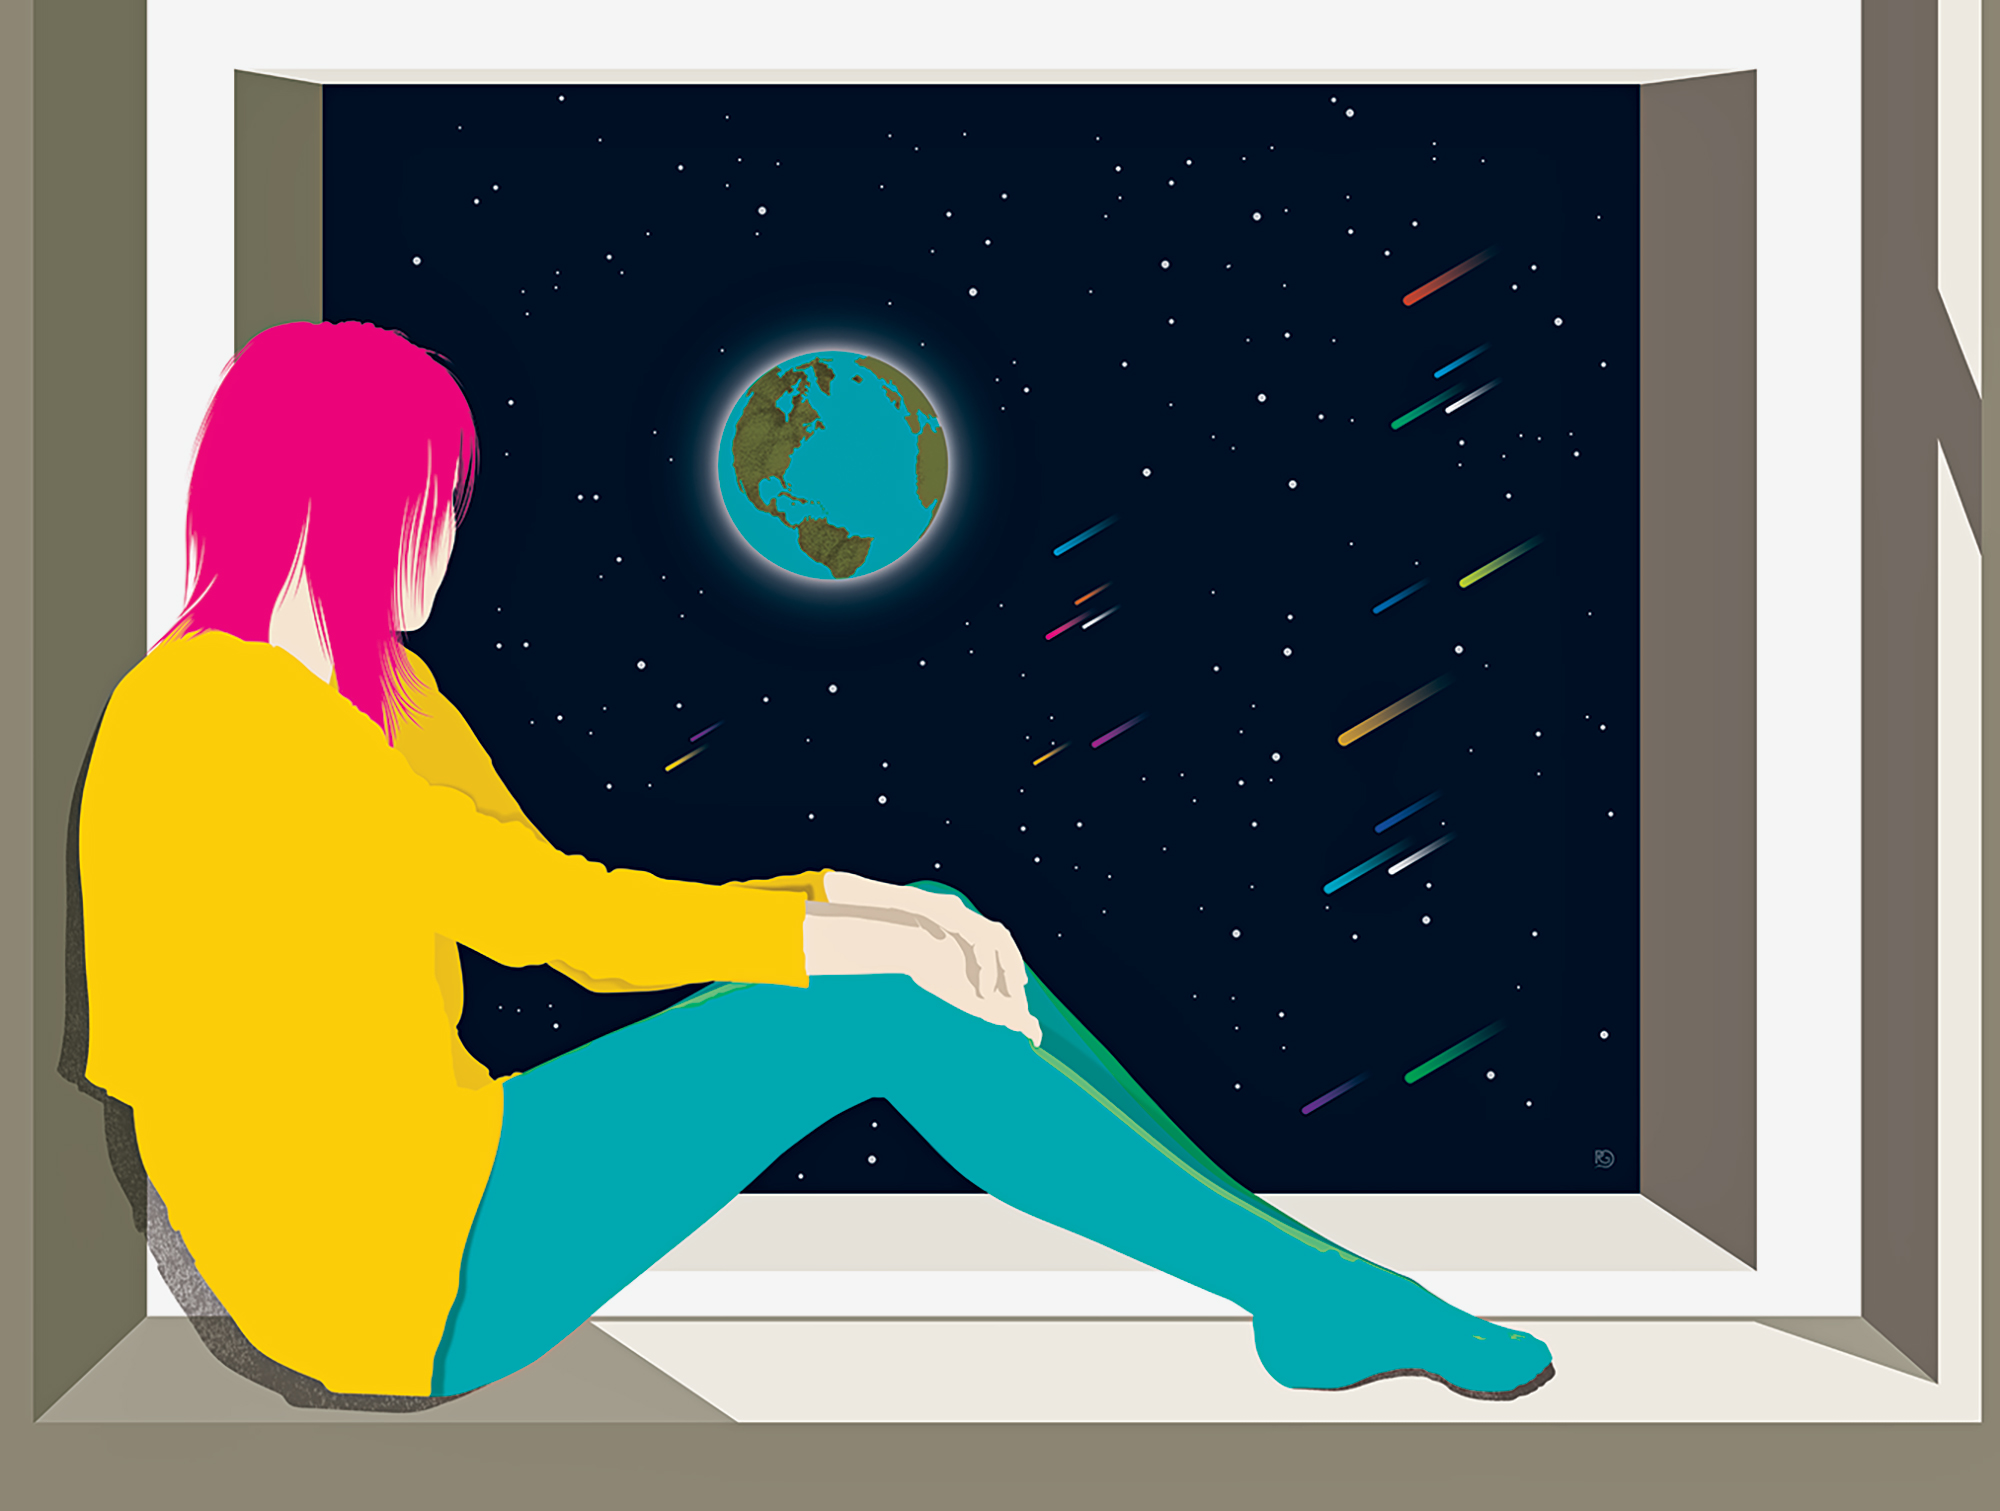 Girl staring out of a window in Isolation, gazing at the Earth in space.